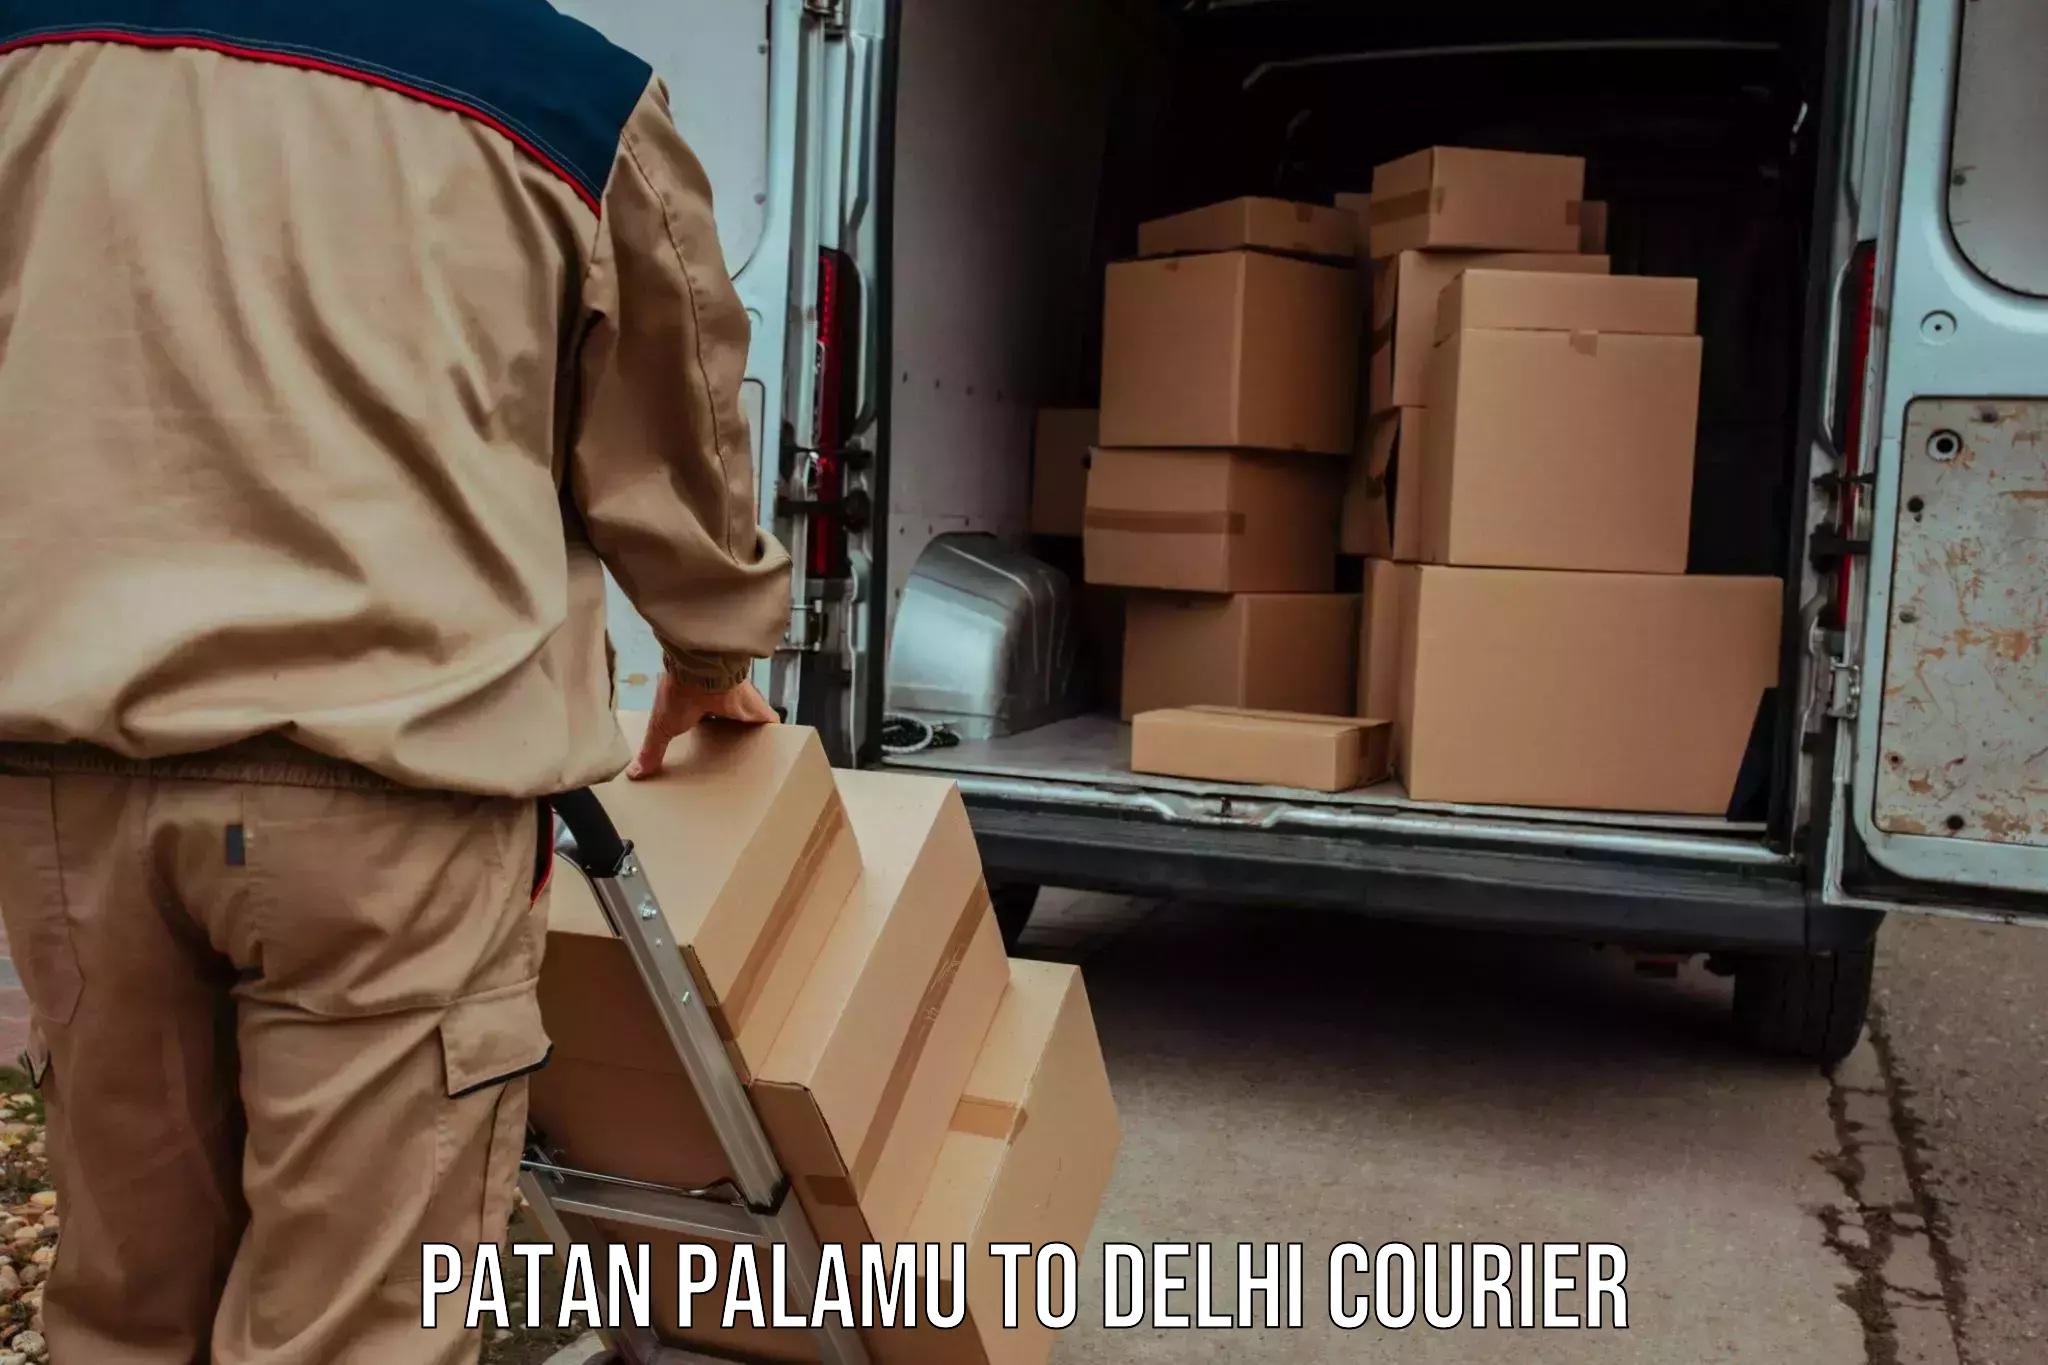 State-of-the-art courier technology Patan Palamu to Delhi